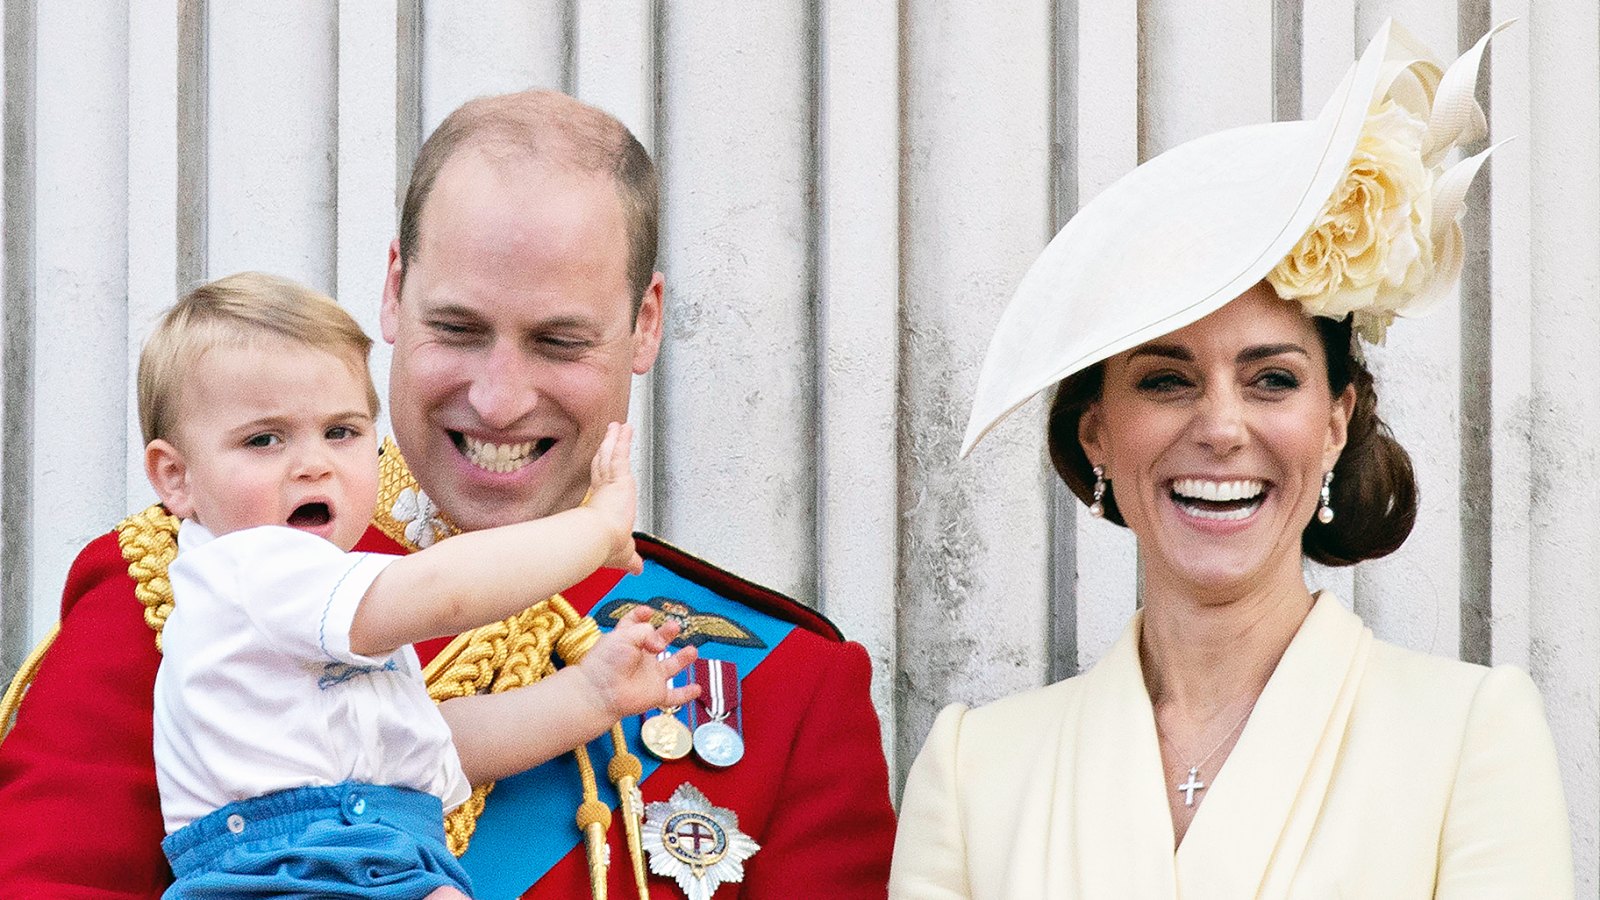 Duchess Kate Admits Her Family Has Had a Really Difficult Time Adjusting to Life in Quarantine